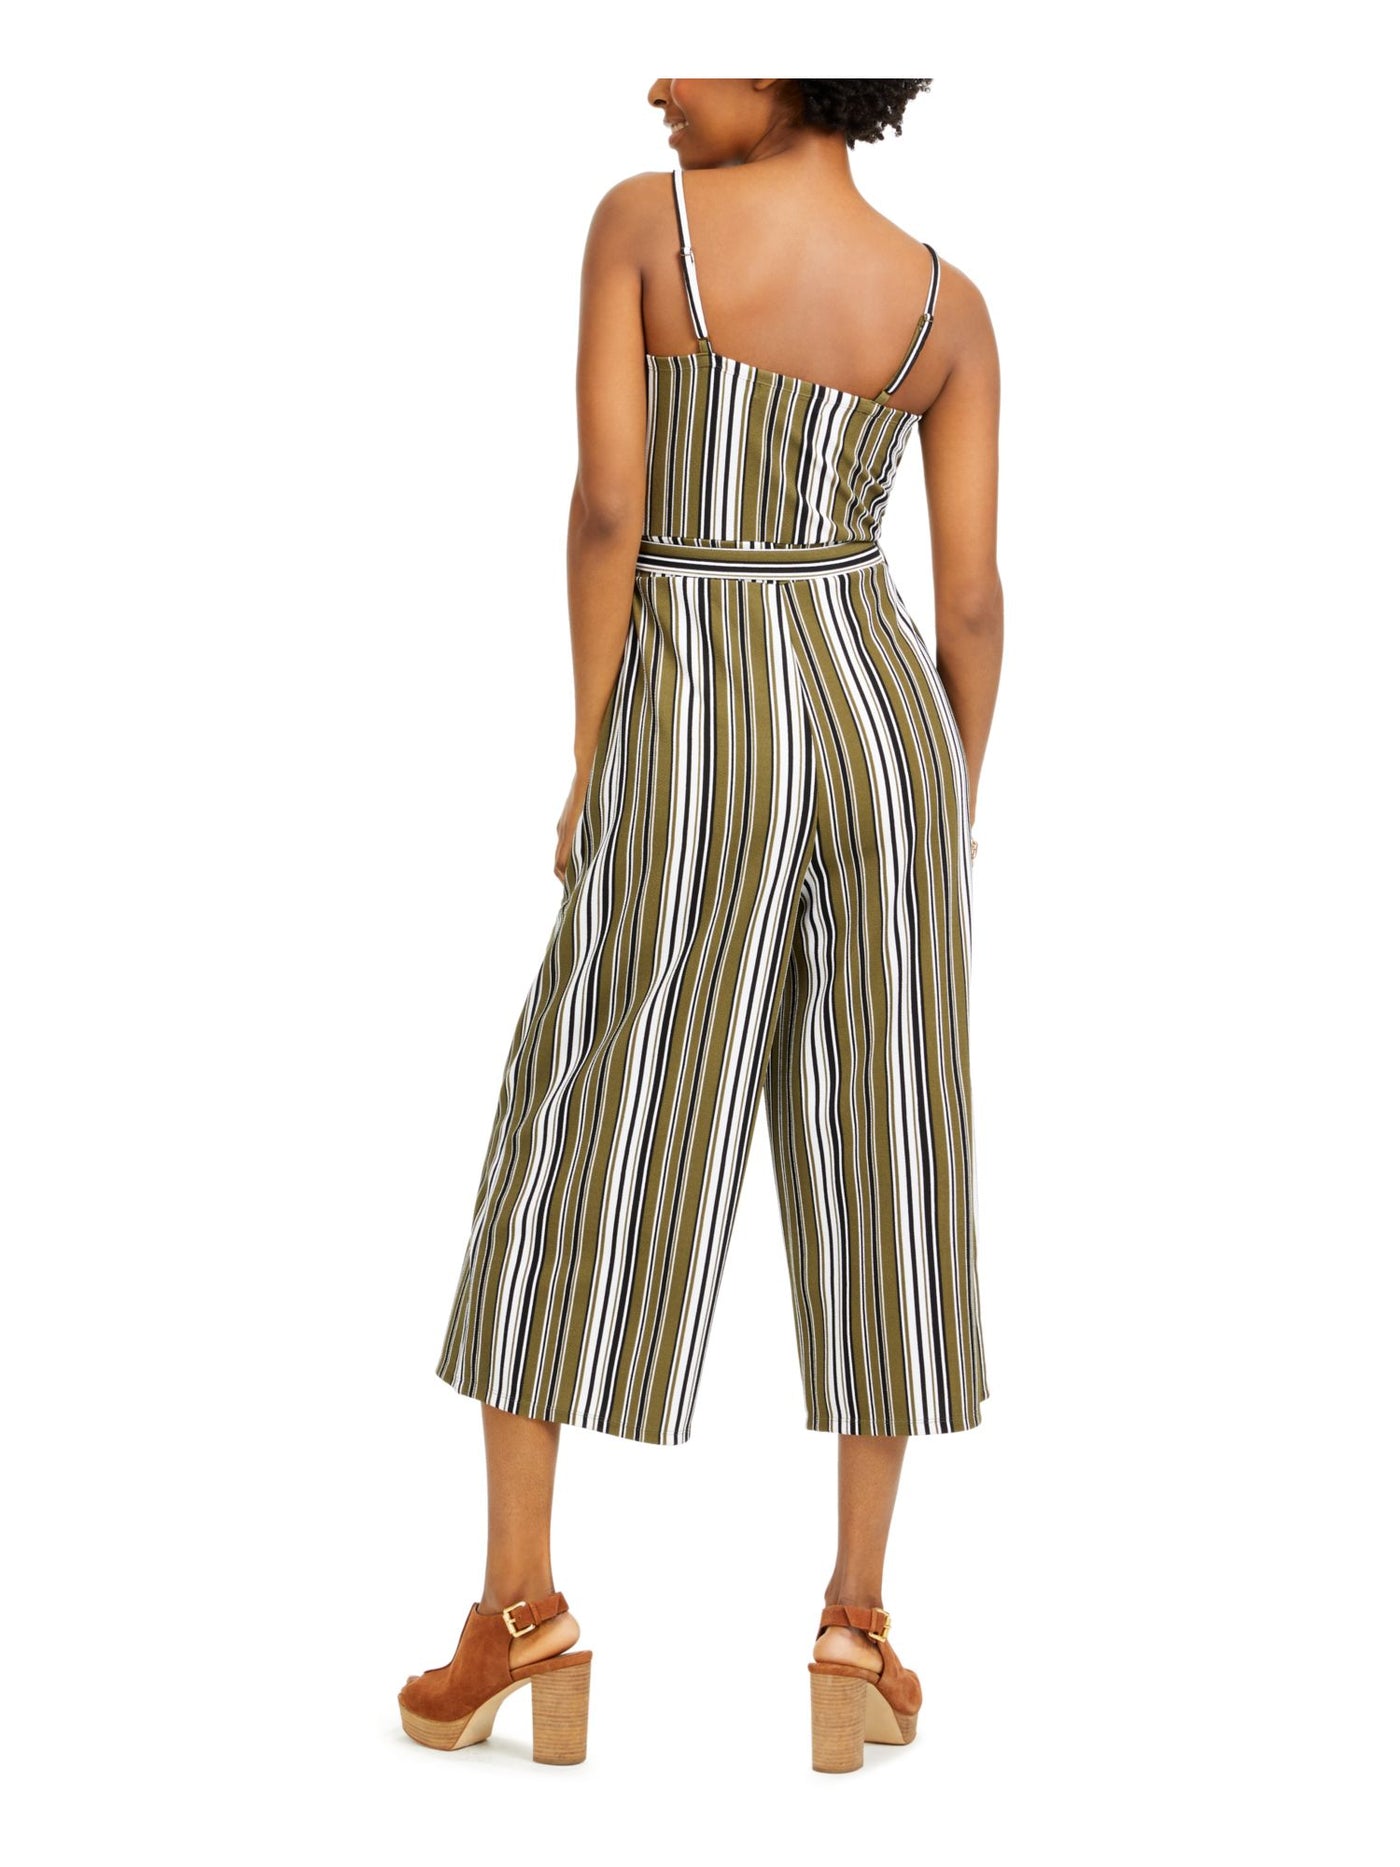 ALMOST FAMOUS Womens Green Belted Striped Spaghetti Strap Sweetheart Neckline Wide Leg Jumpsuit Juniors S